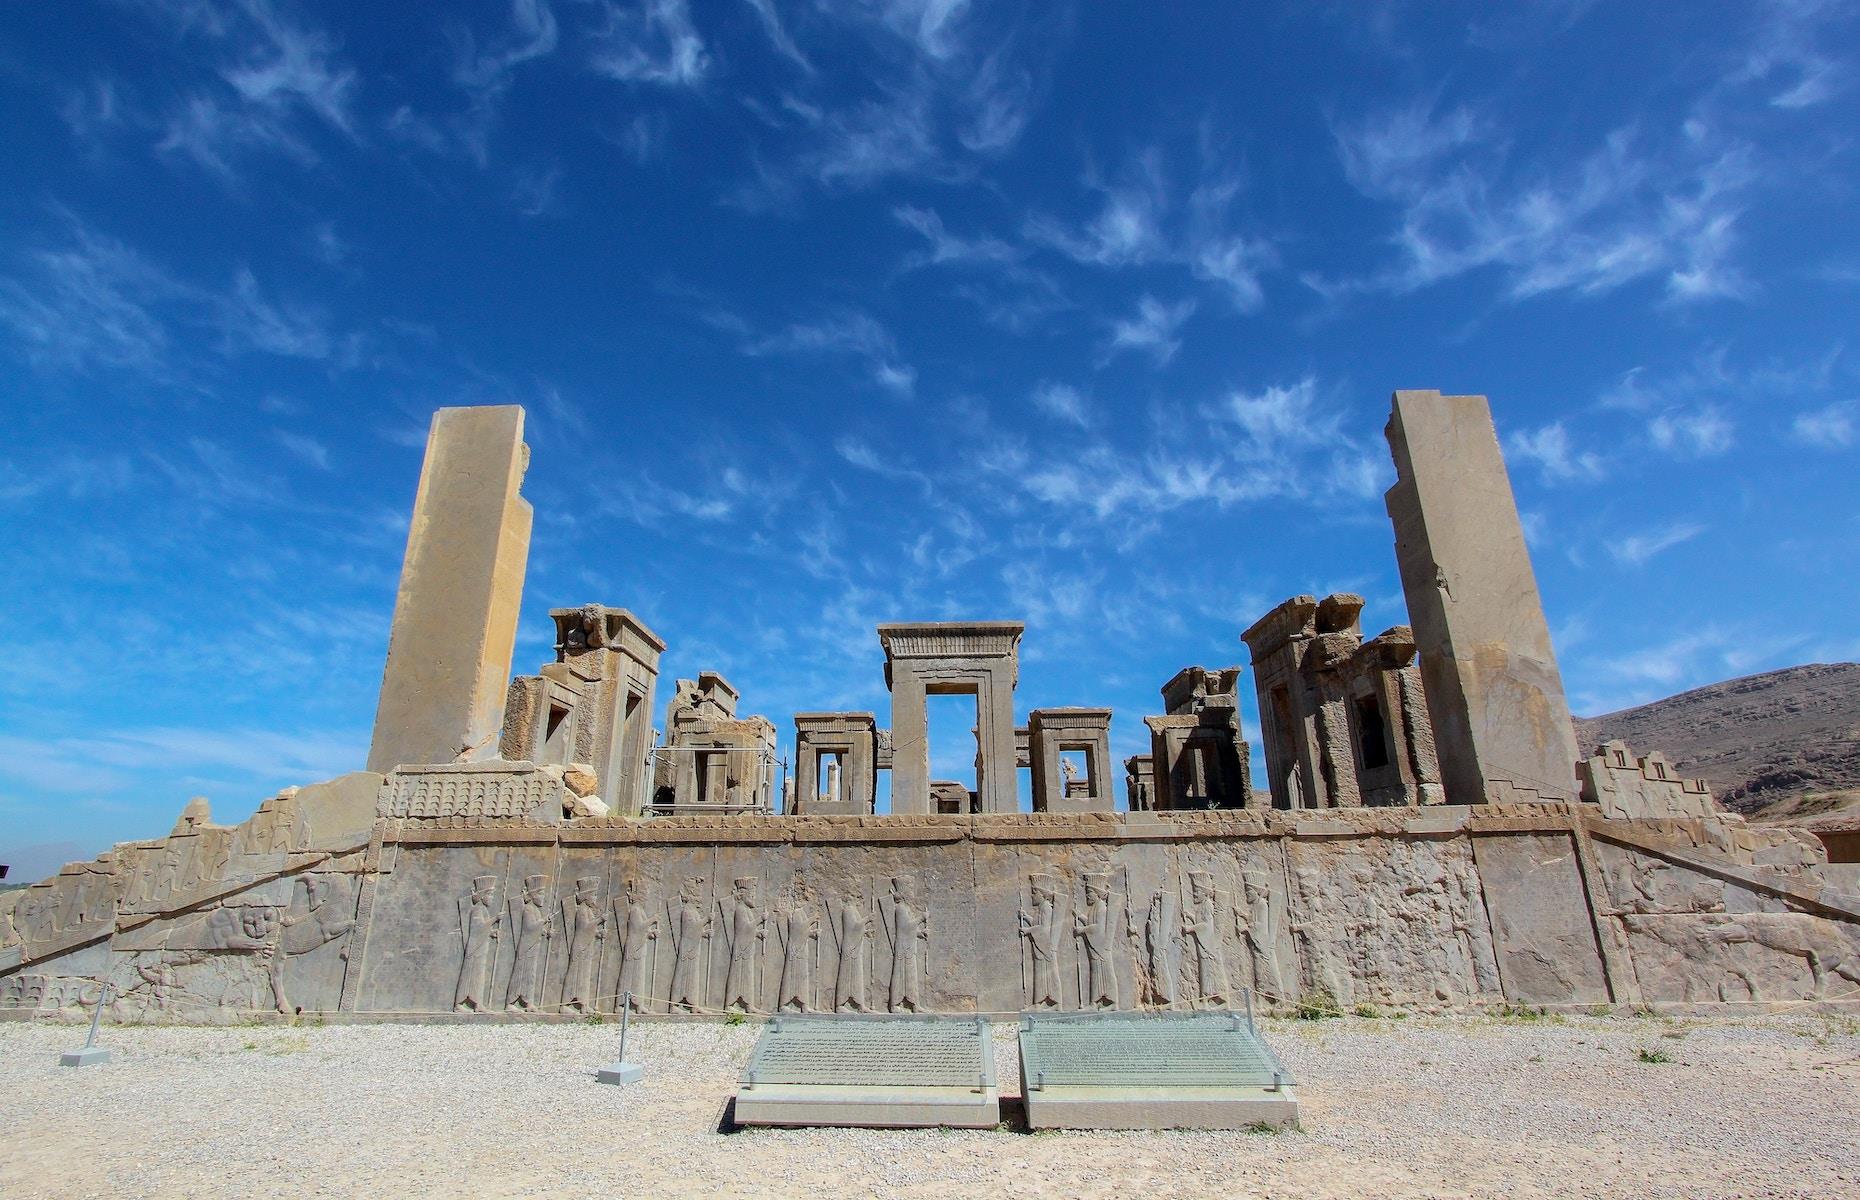 Along with Persepolis's ornate columns and richly decorated façades, the Gate of All Nations (pictured) is one of the ruin’s most famous sights. The Achaemenian palaces of Persepolis were built upon massive terraces and decorated with long rock relief carvings for which the ancient Persians are known. The great city was torched by Alexander the Great in 321 BC during the reign of Darius III, and large parts of the complex destroyed. It sits 30 miles northeast of the city of Shiraz.